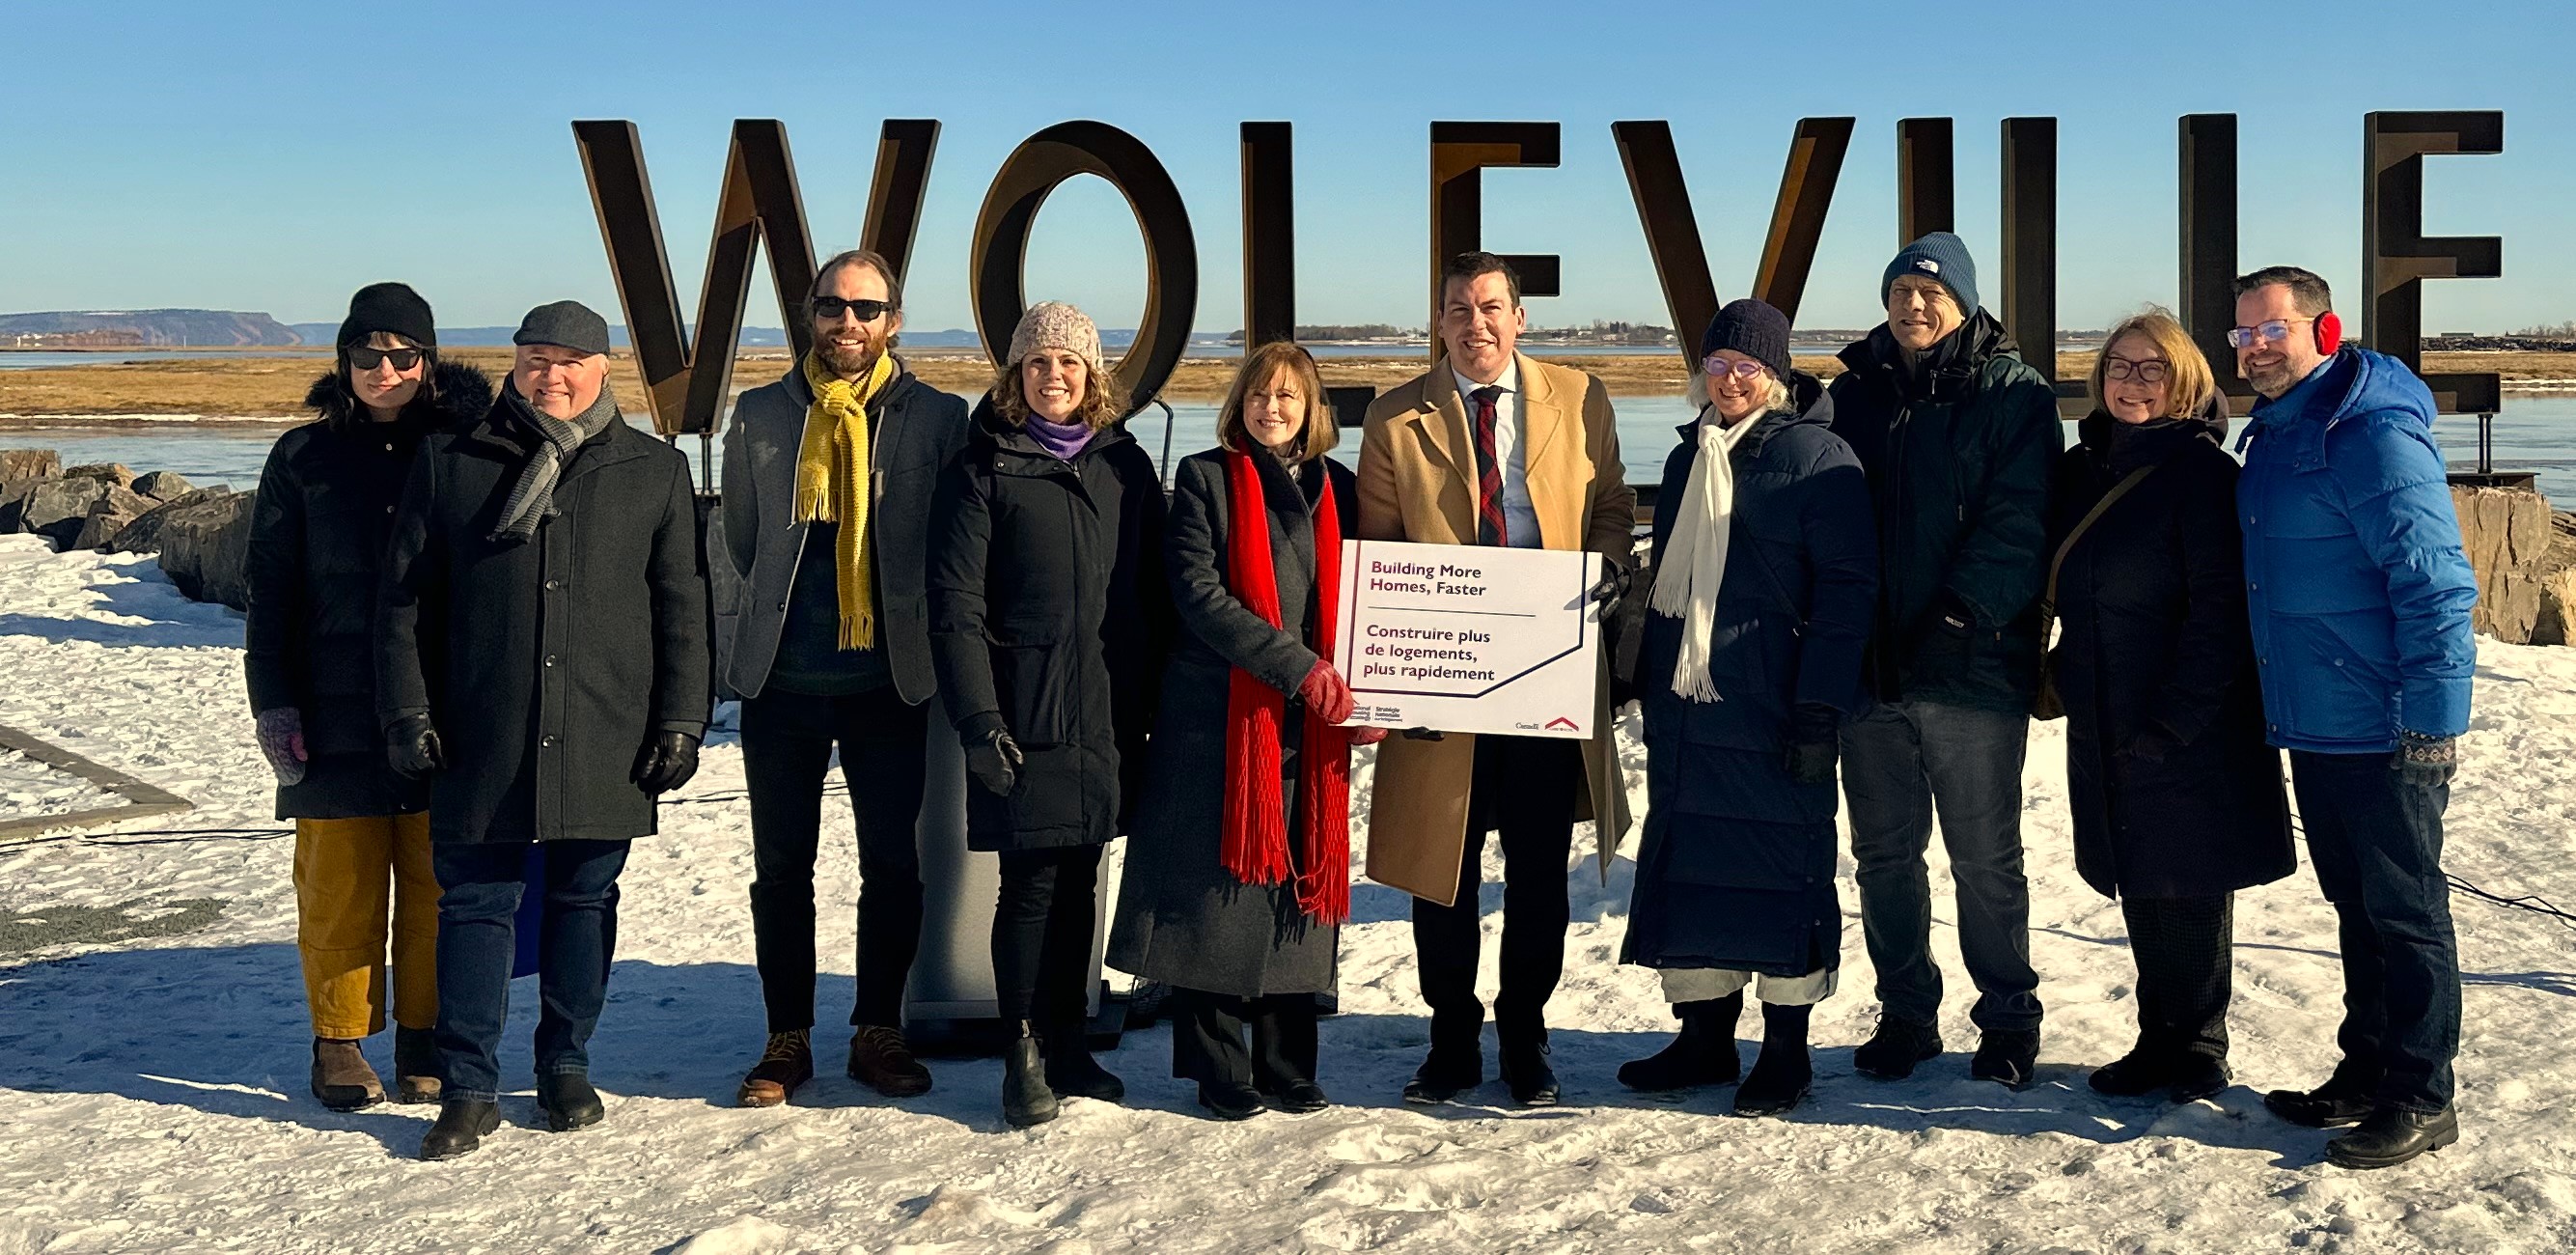 A crowd stands in front of the Wolfville sign.